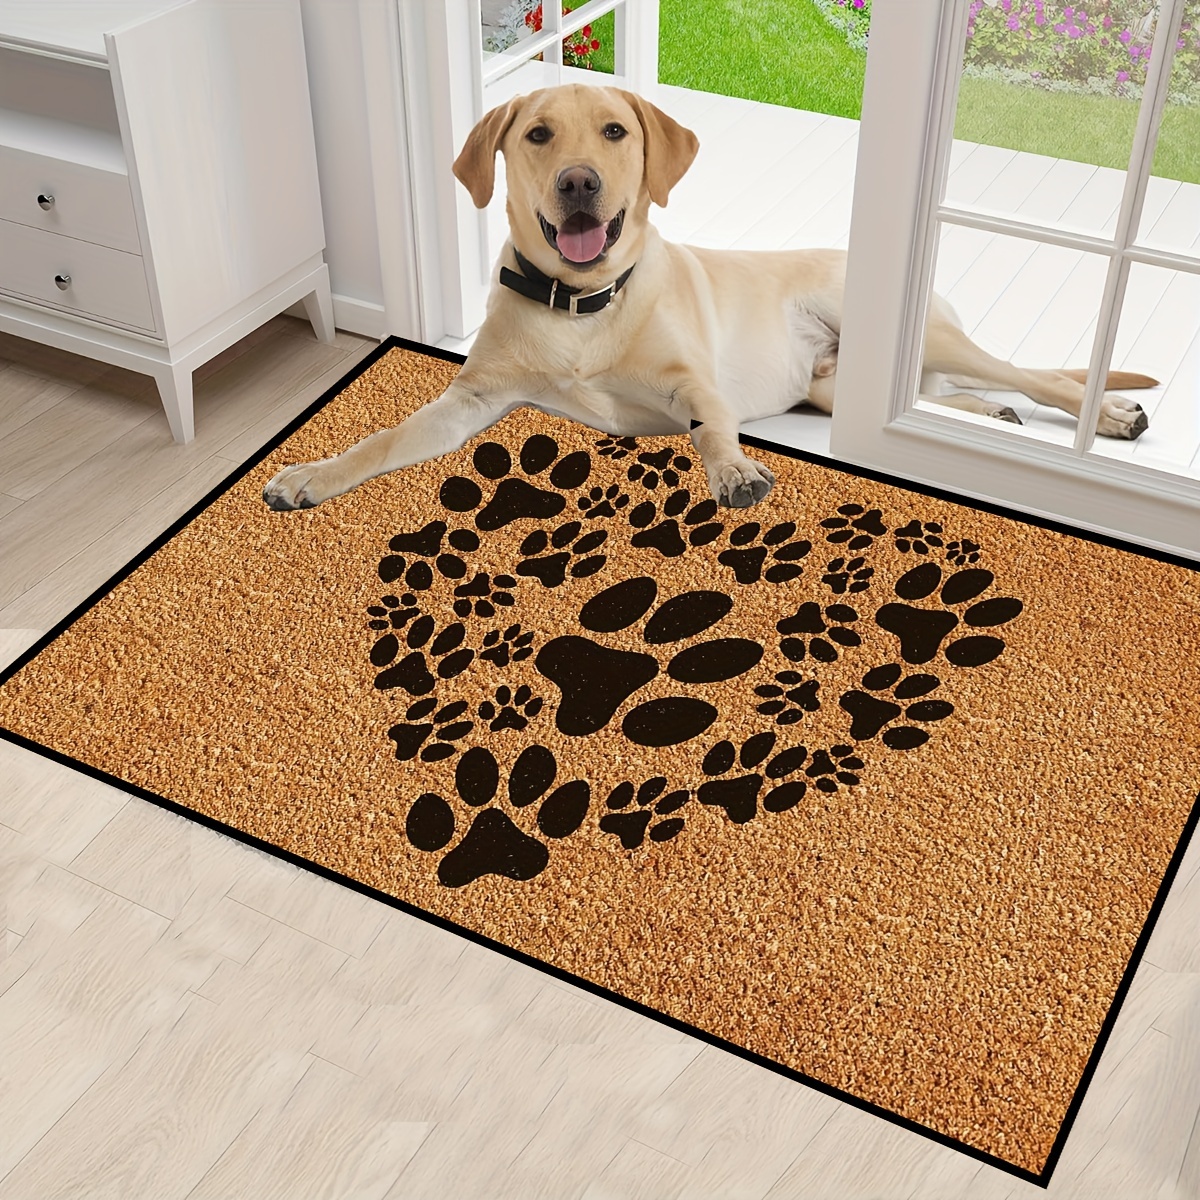 

Machine Washable Polyester Doormat - Rectangle Stain Resistant Non-slip Entrance Rug With Soft Crystal Velvet, Ideal For Bathroom, Living Room, And Entryway - Hello Dog And Cat Paw Print Design